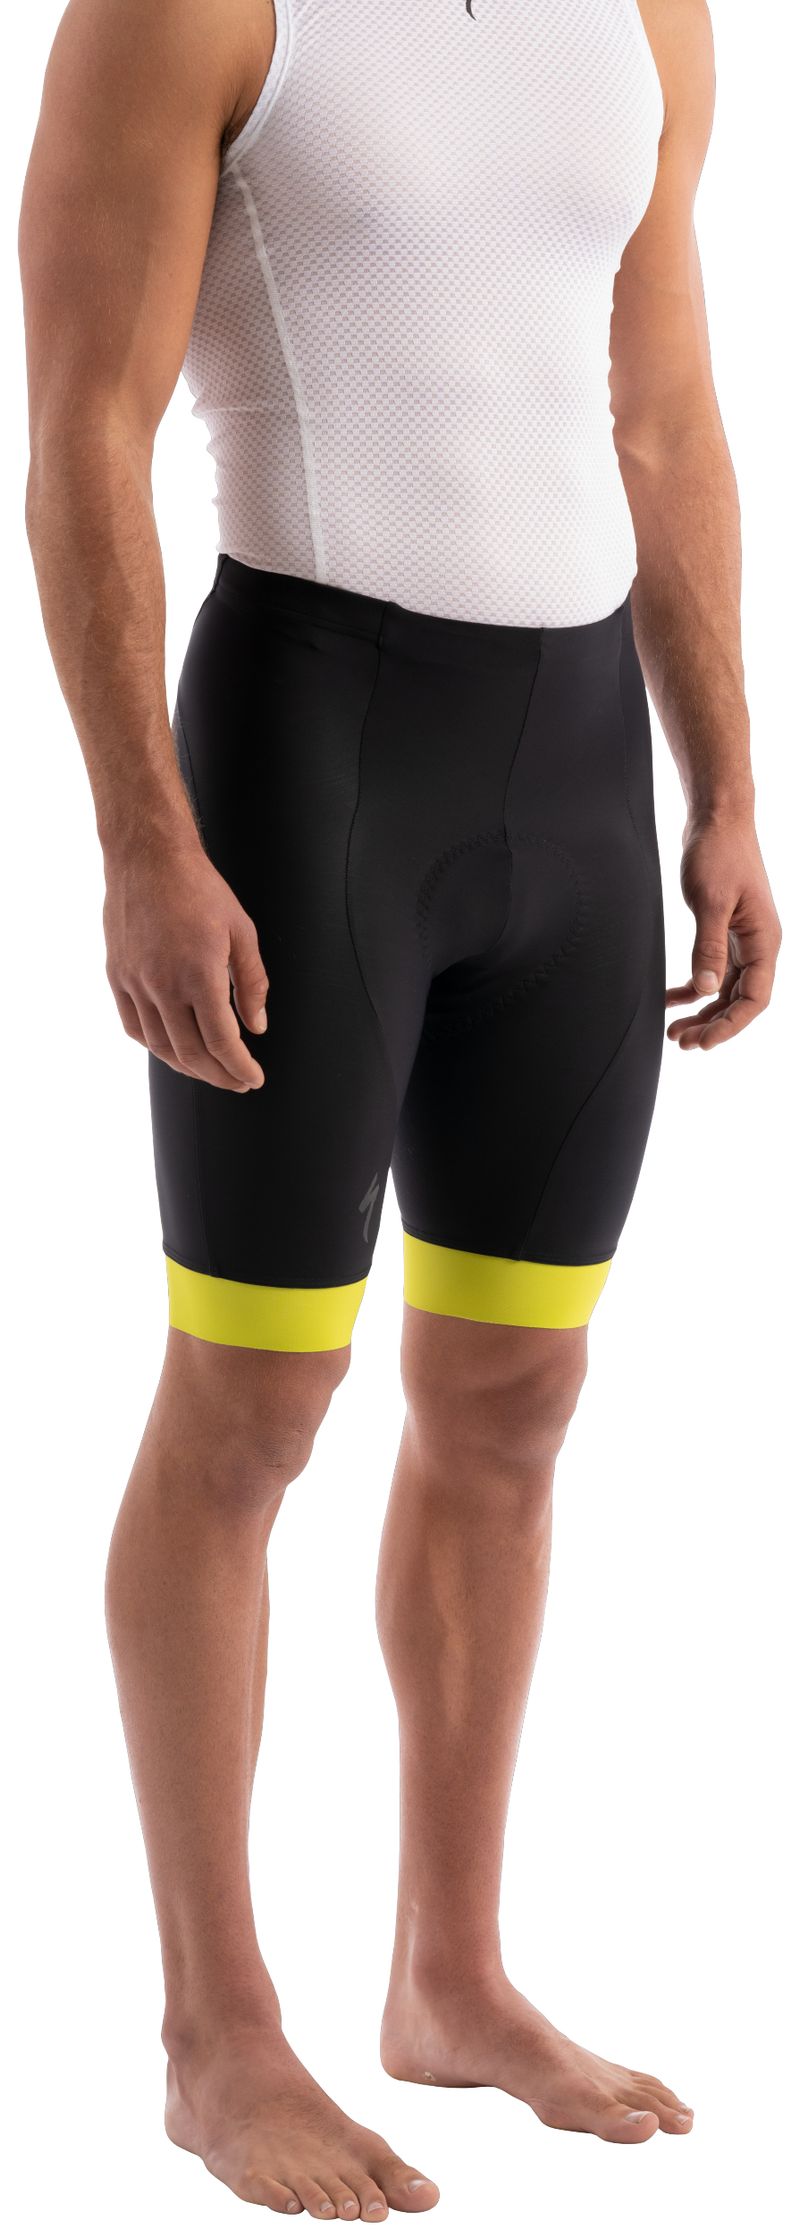 specialized rbx shorts